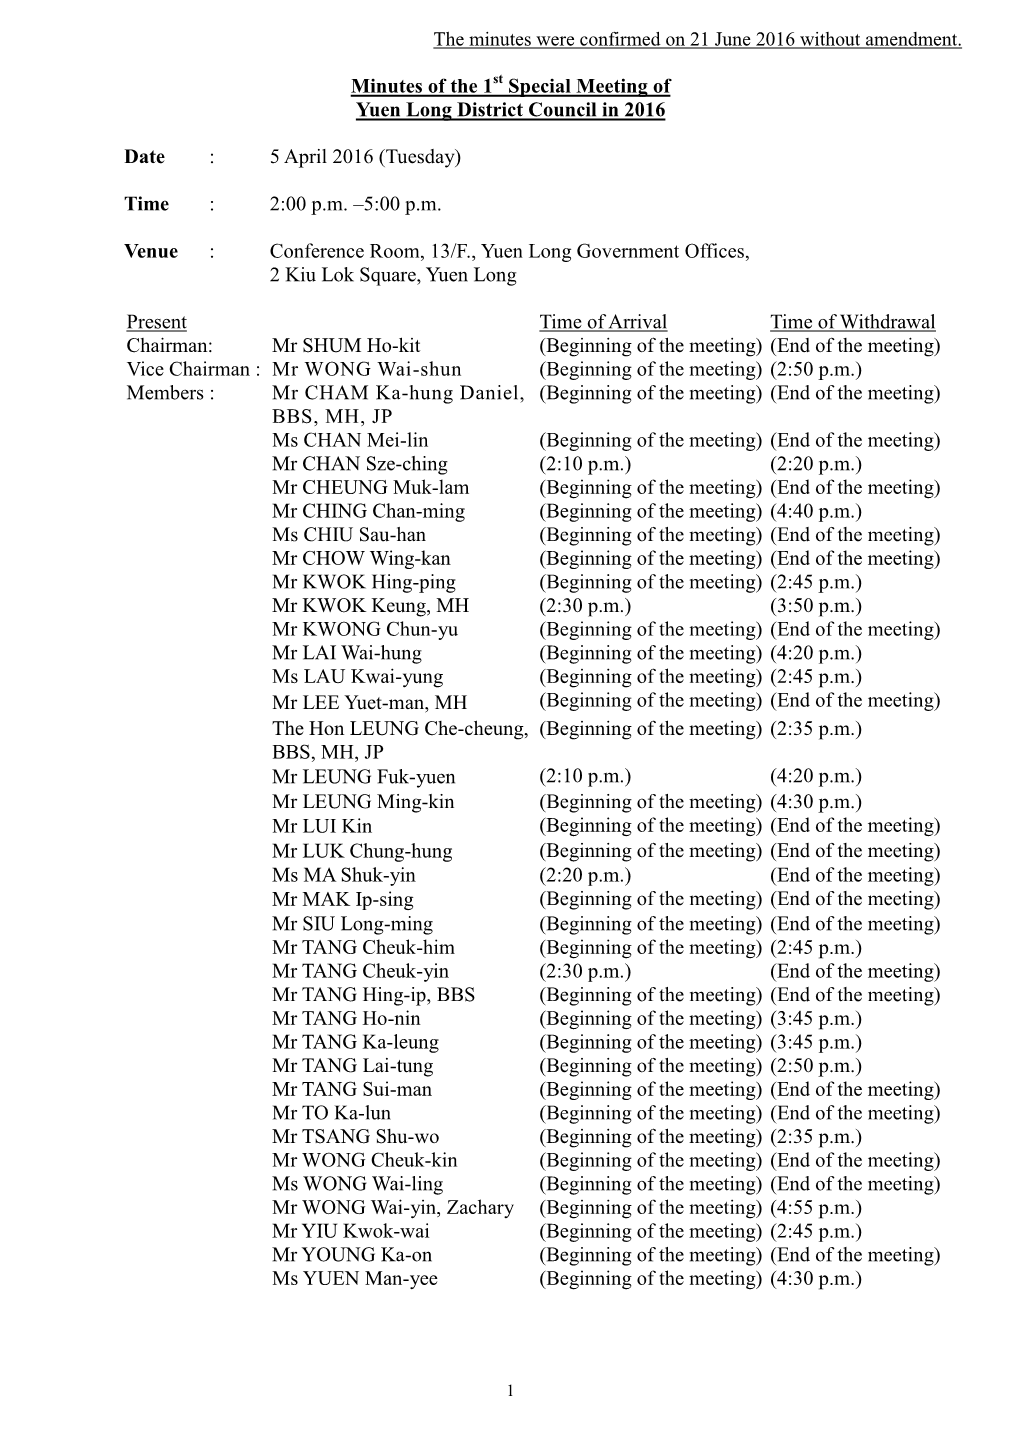 Minutes of the 1 Special Meeting of Yuen Long District Council in 2016